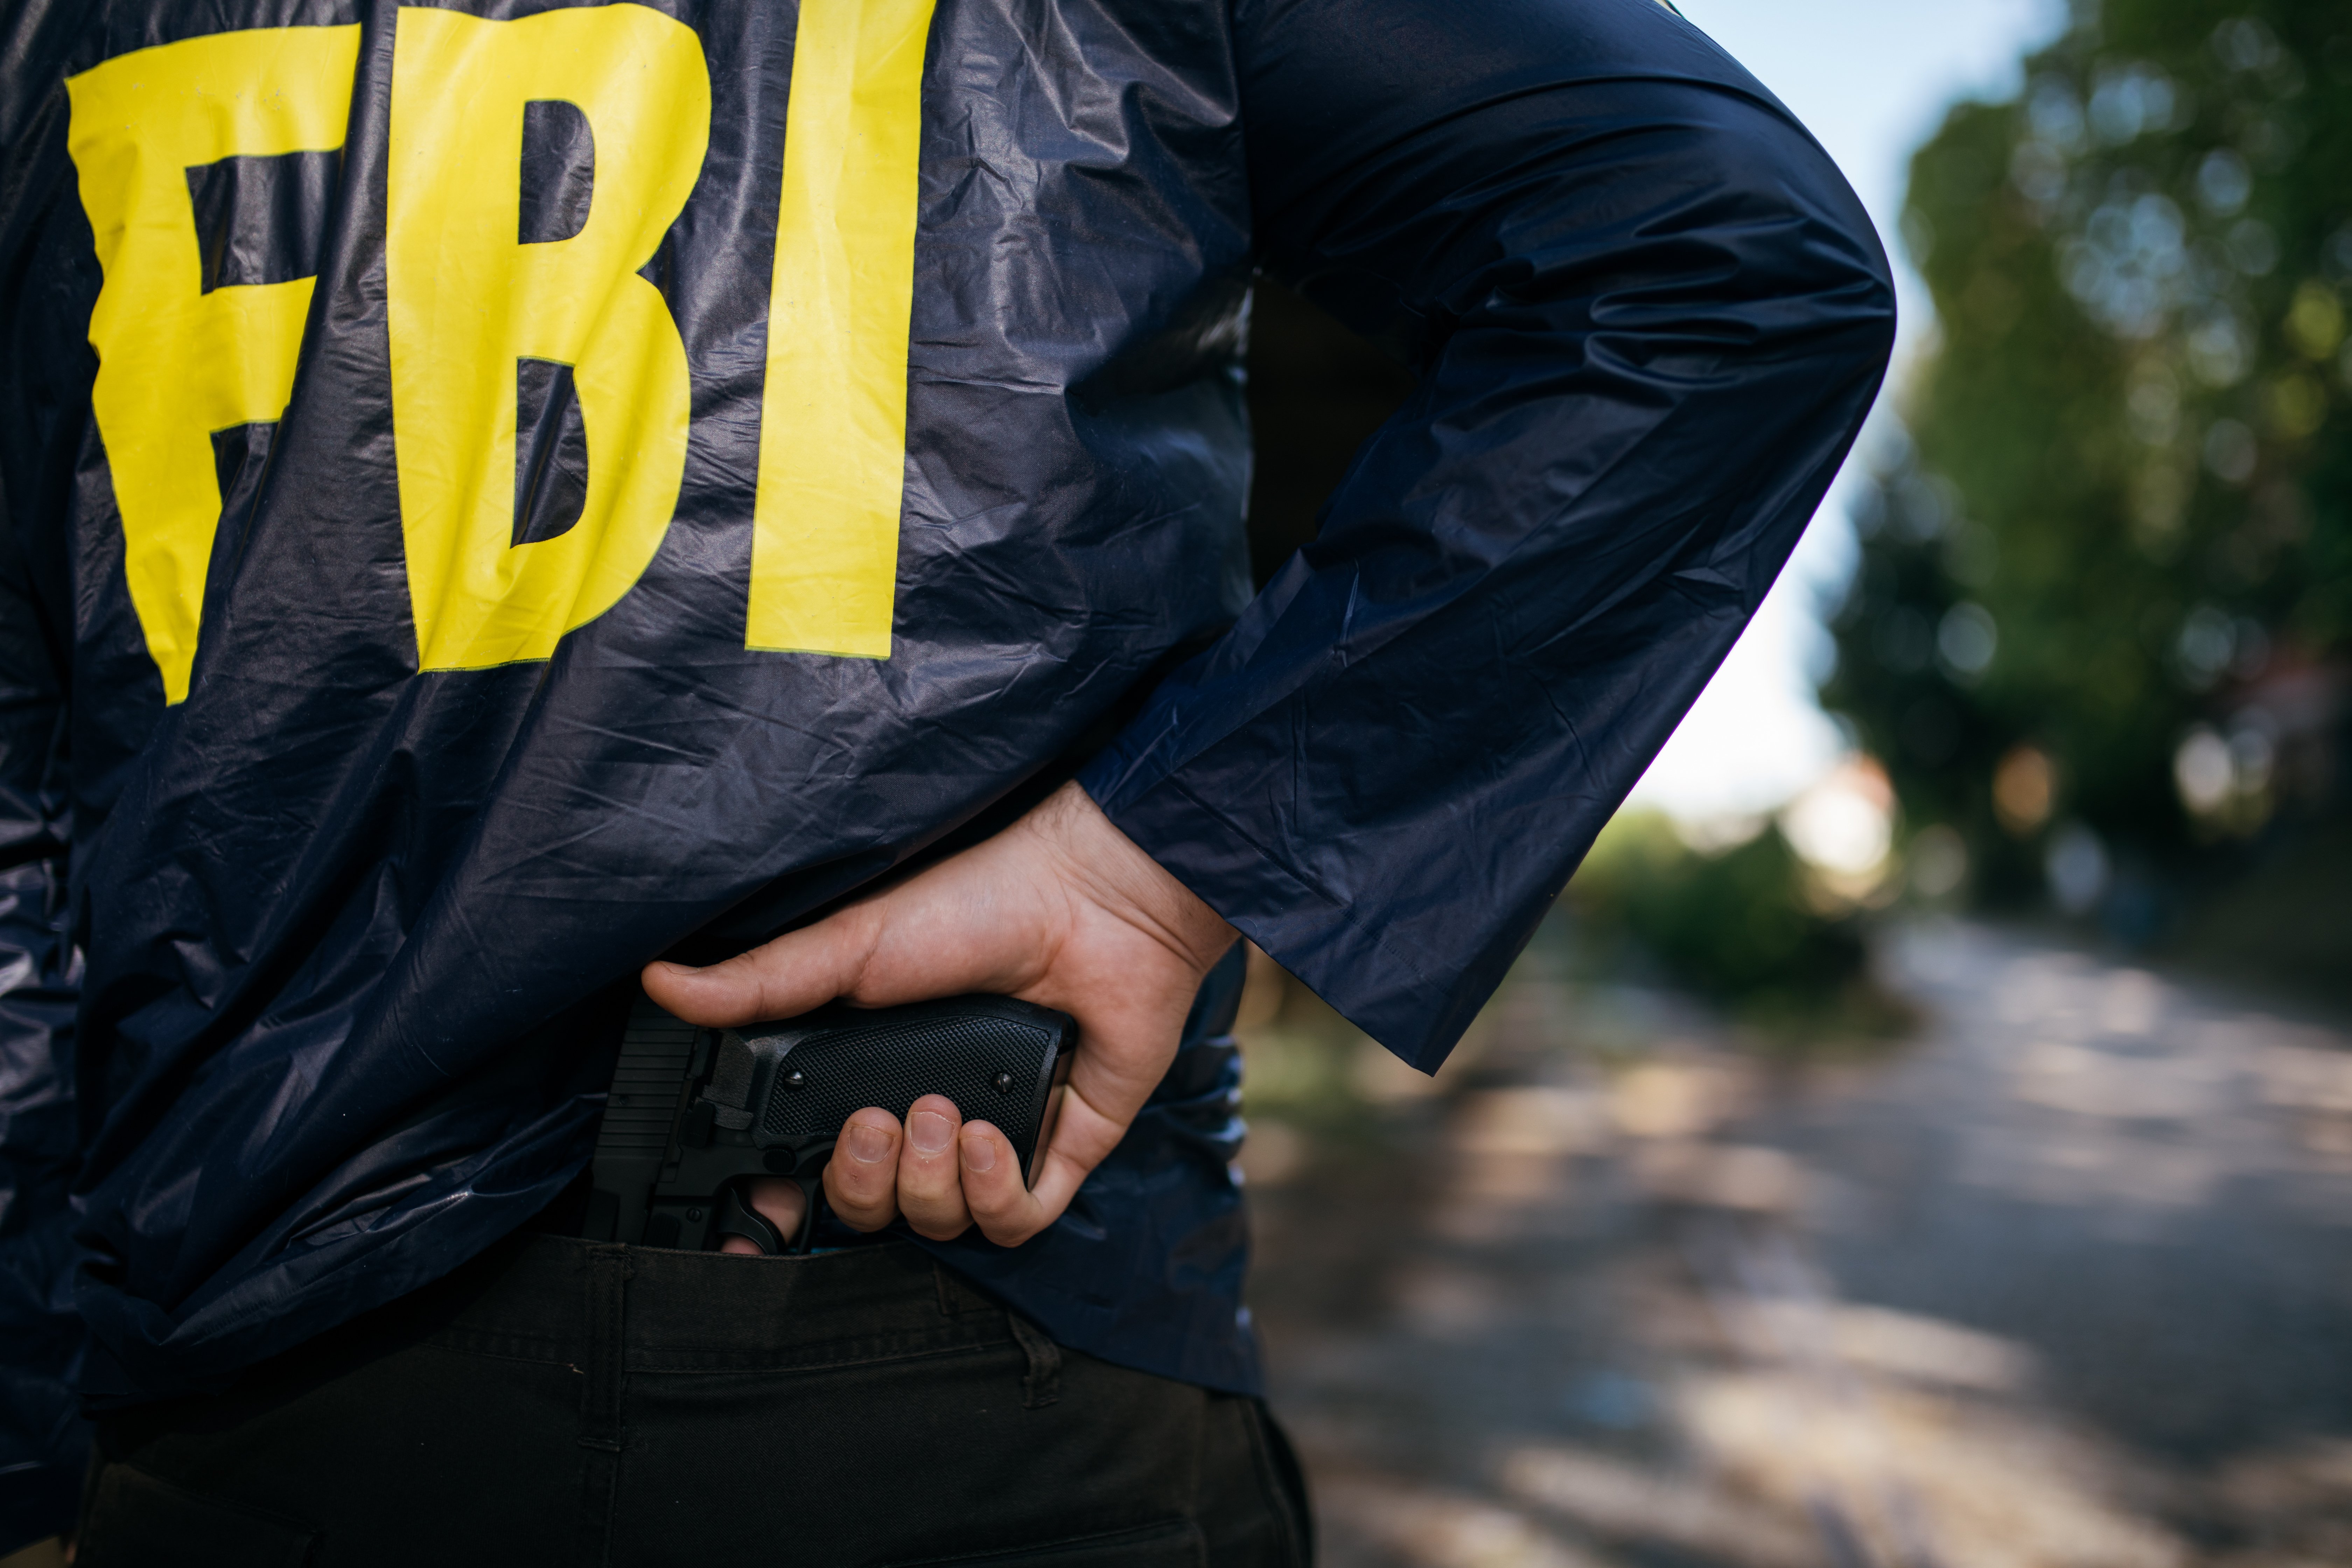 Cropped photo of FBI agent in action with a pistol, rear view/ Shutterstock, by Dzelat